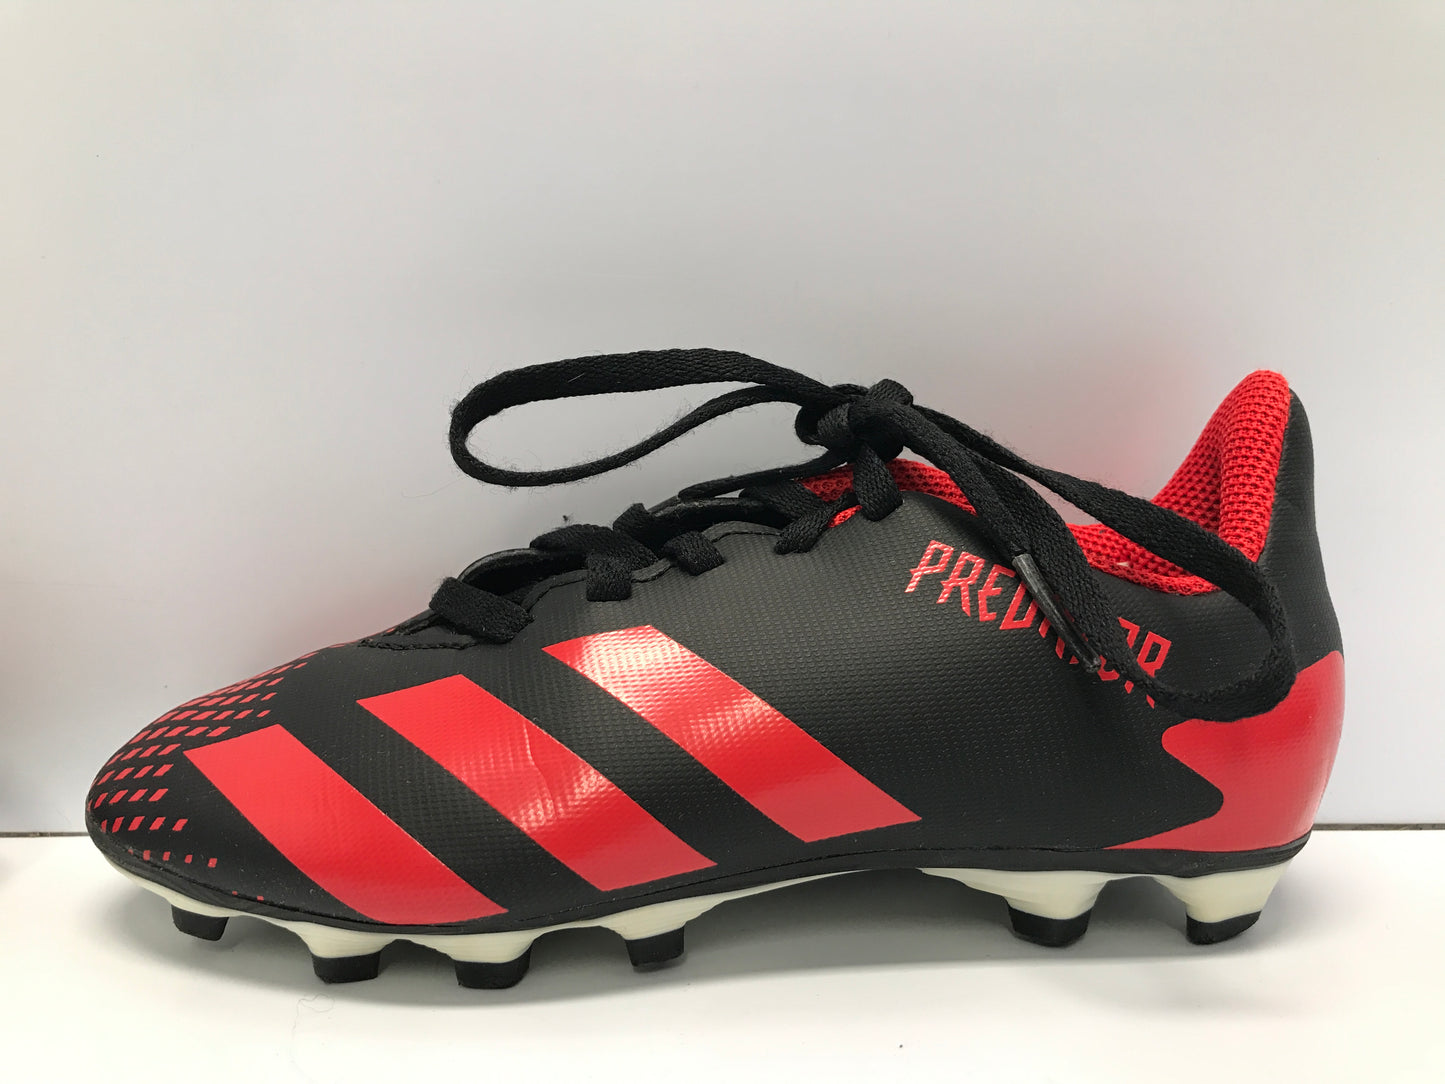 Soccer Shoes Cleats Child Size 13 Adidas Predator Black Red Grey Like New